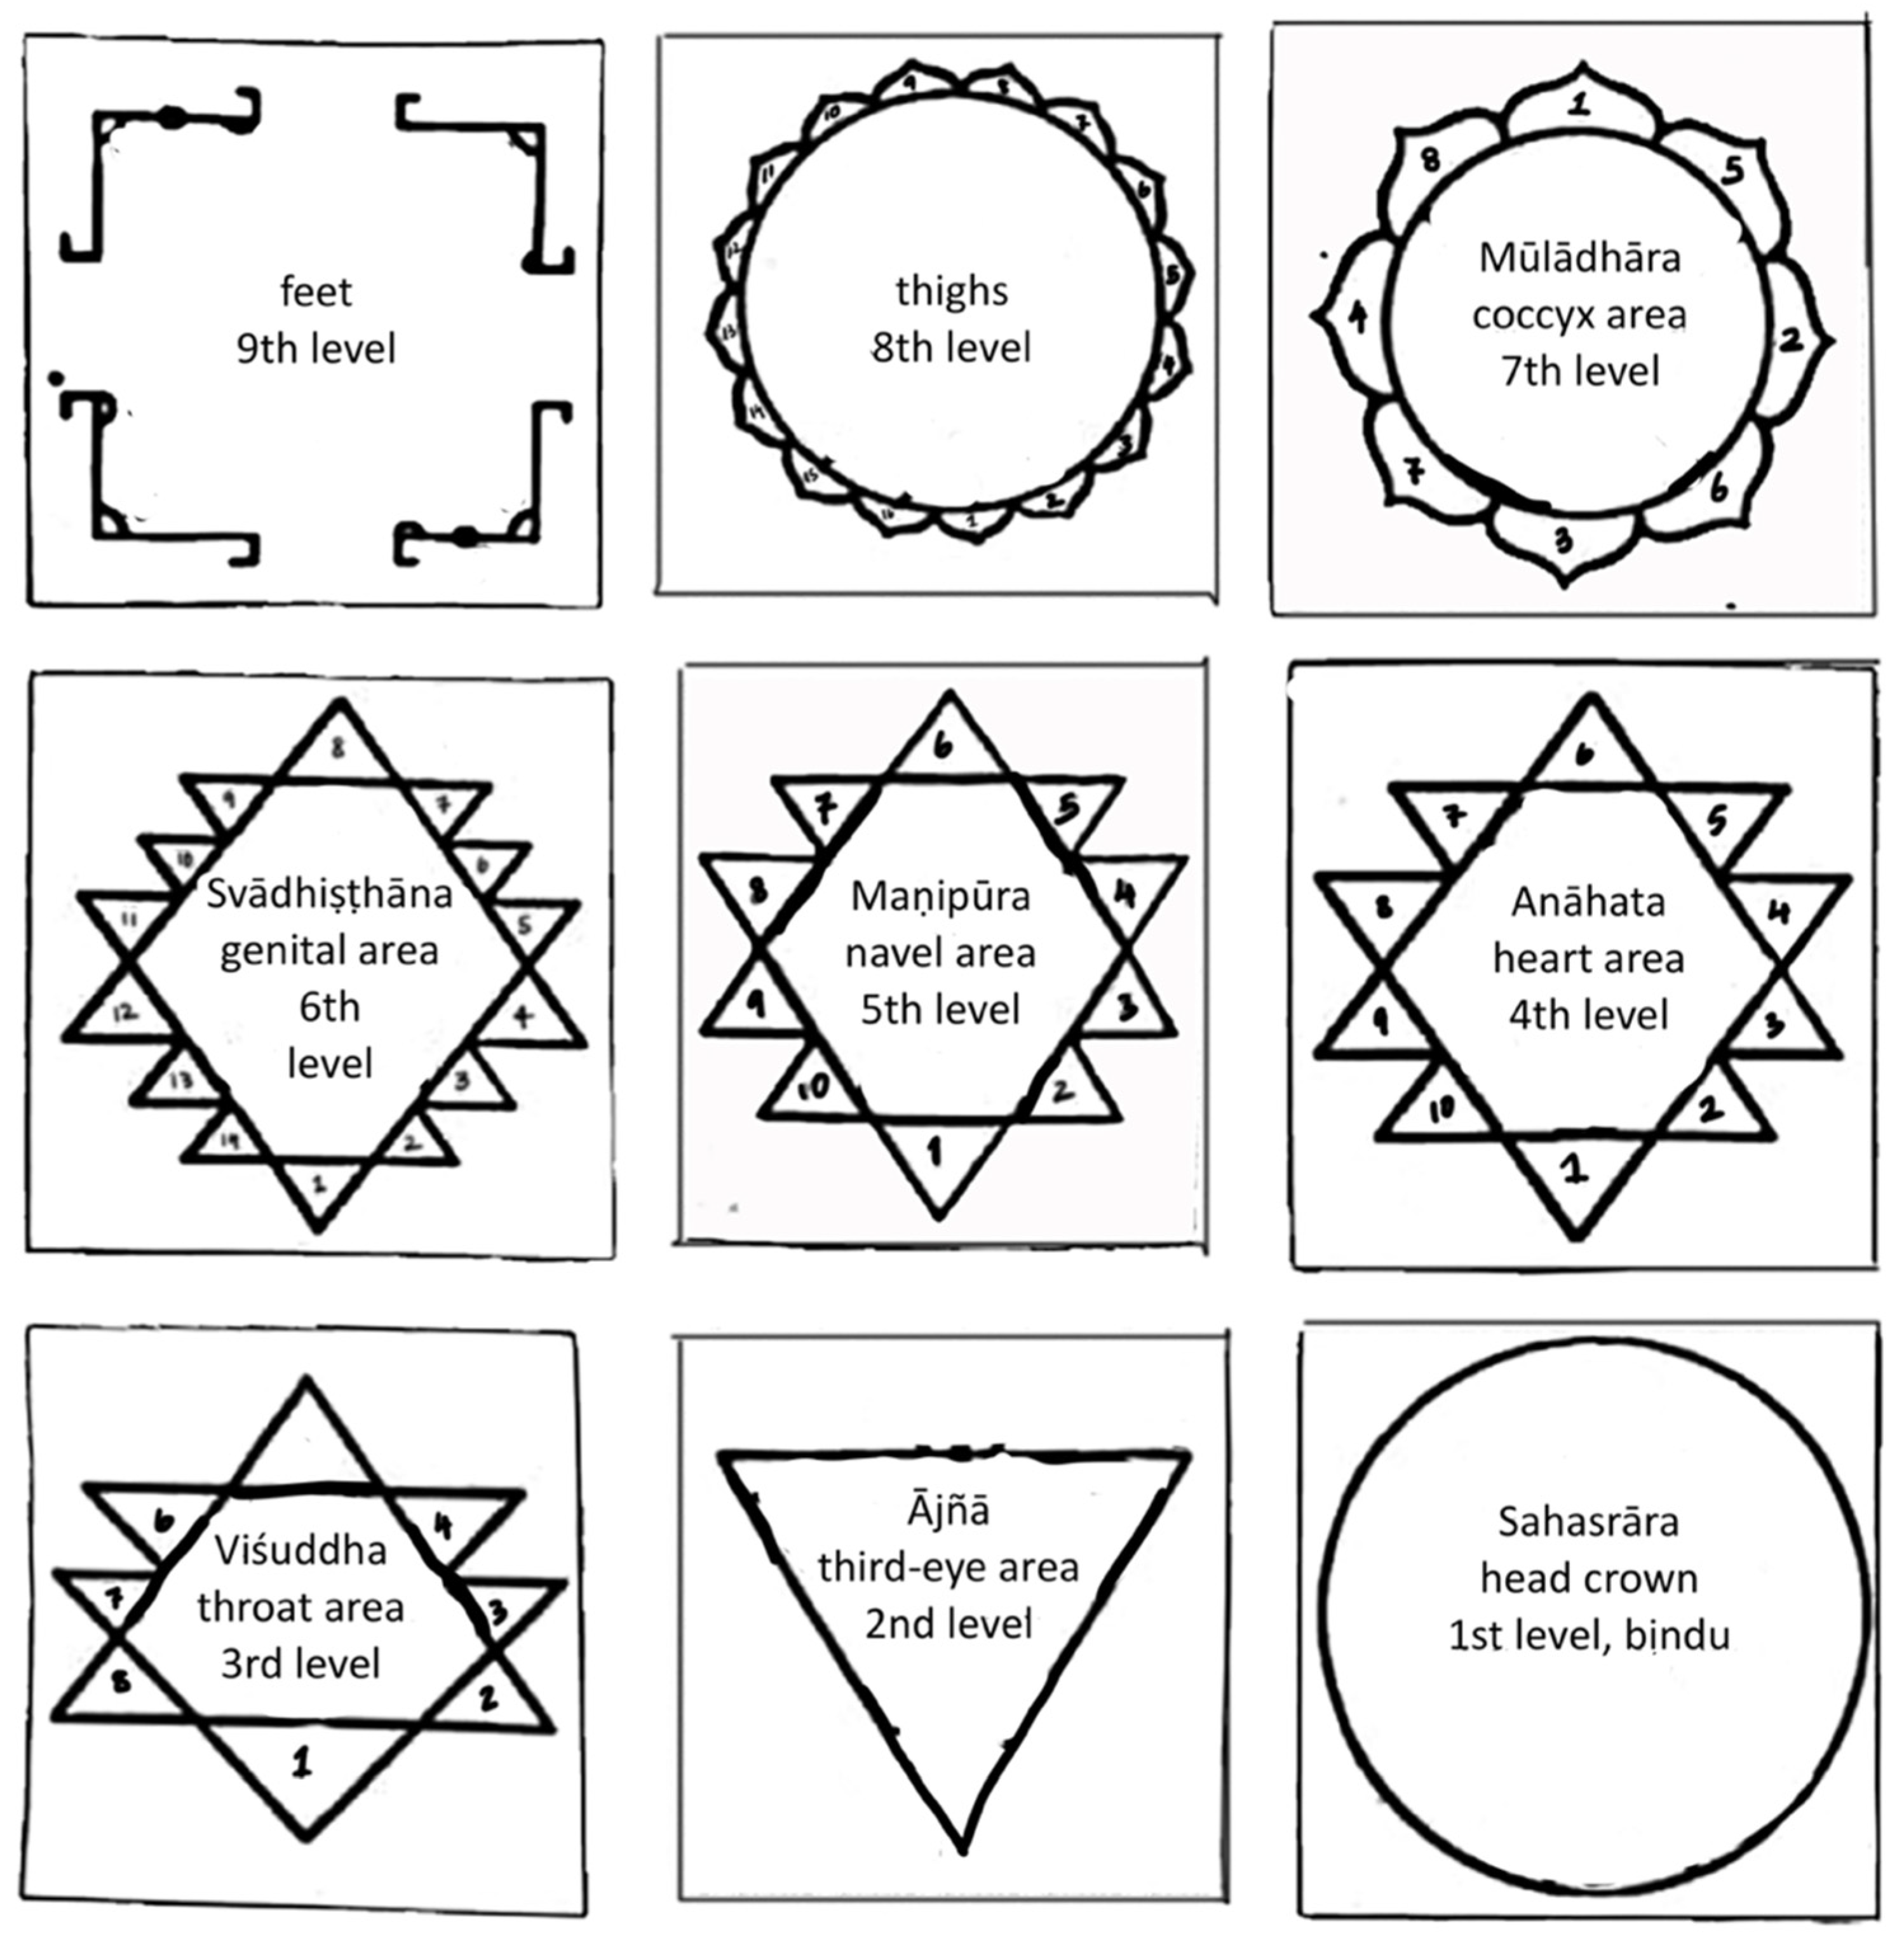 Re-Heritage - What Is Shri Yantra  Shri Chakra? The Shri Yantra is also  known as Sri Chakra is a Yantra (Geometrical Design), that is an important  part of tantric traditions. The